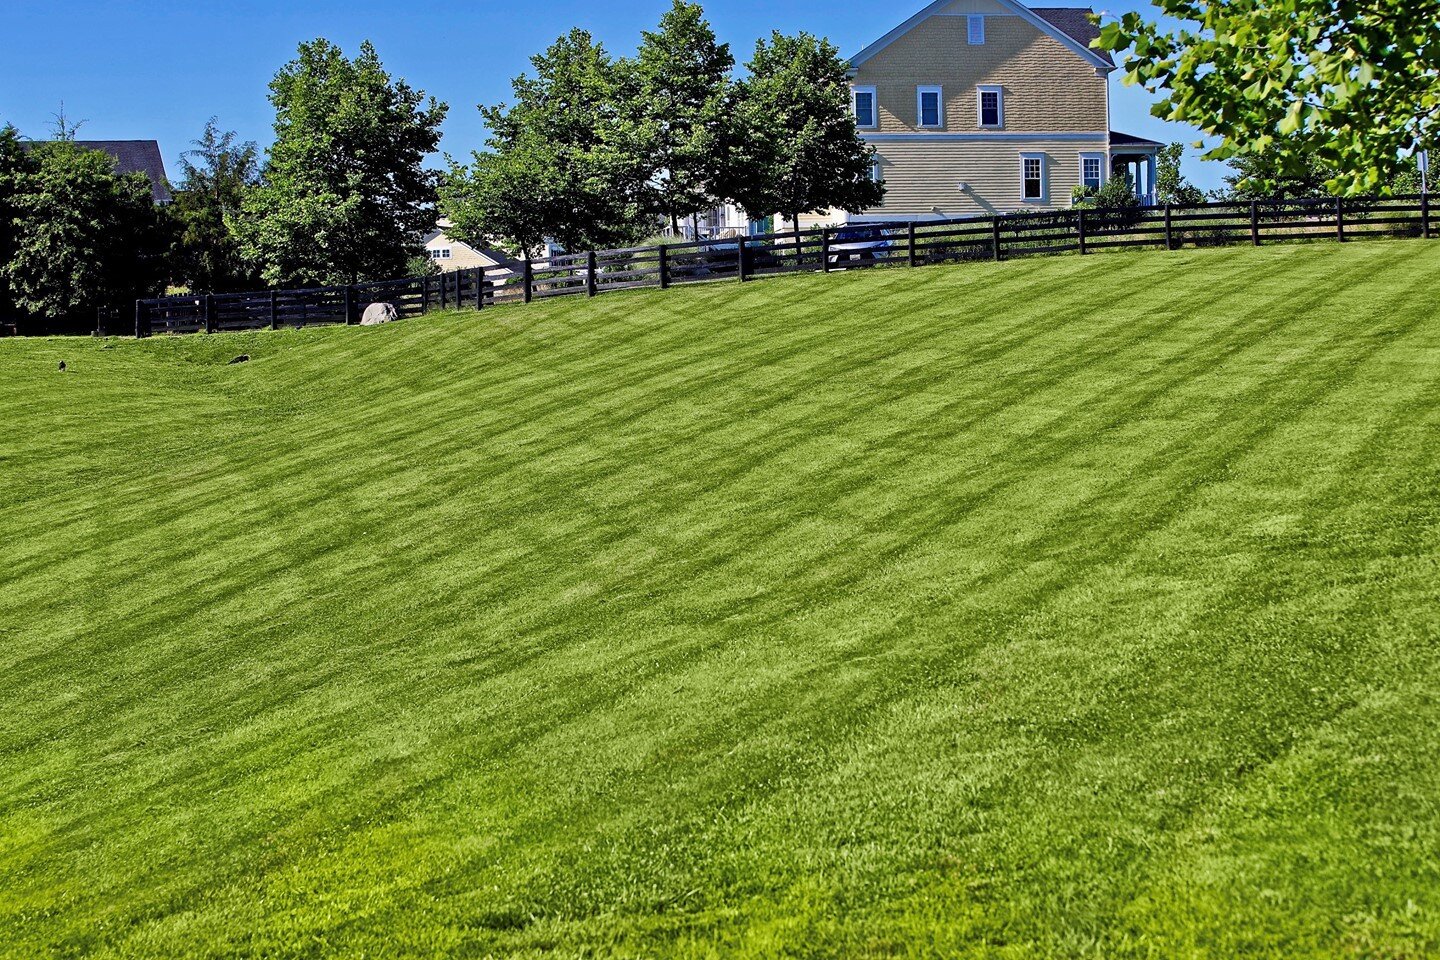 A look at the work our fantastic Virginia maintenance division does at Willowsford. We even treat the dog park like it's a country club!

https://www.downtoearthlandscaping.com/grounds-maintenance
.
.
#dogpark #dogrun #landscaping #lawn #mowing #main